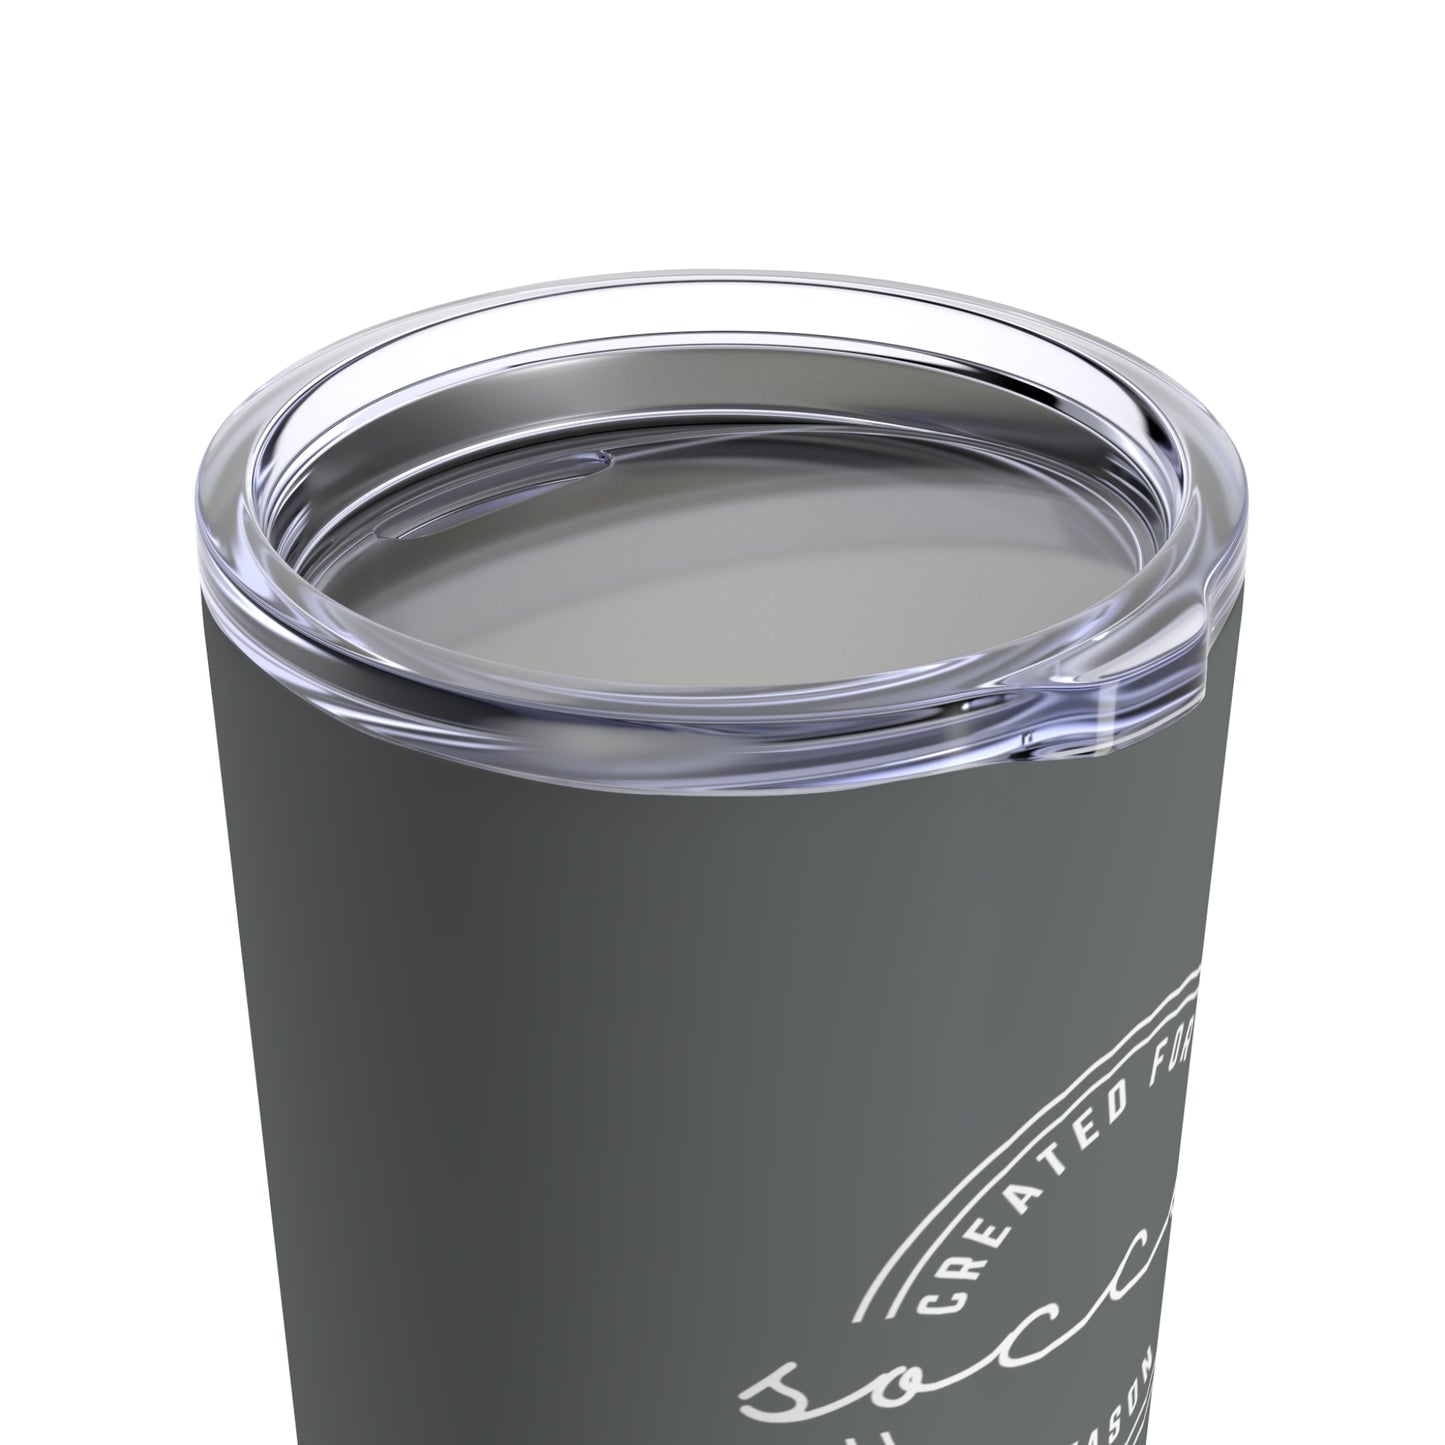 Created For This Season Stainless Steel 20 Oz Soccer Coach's Wife Tumbler